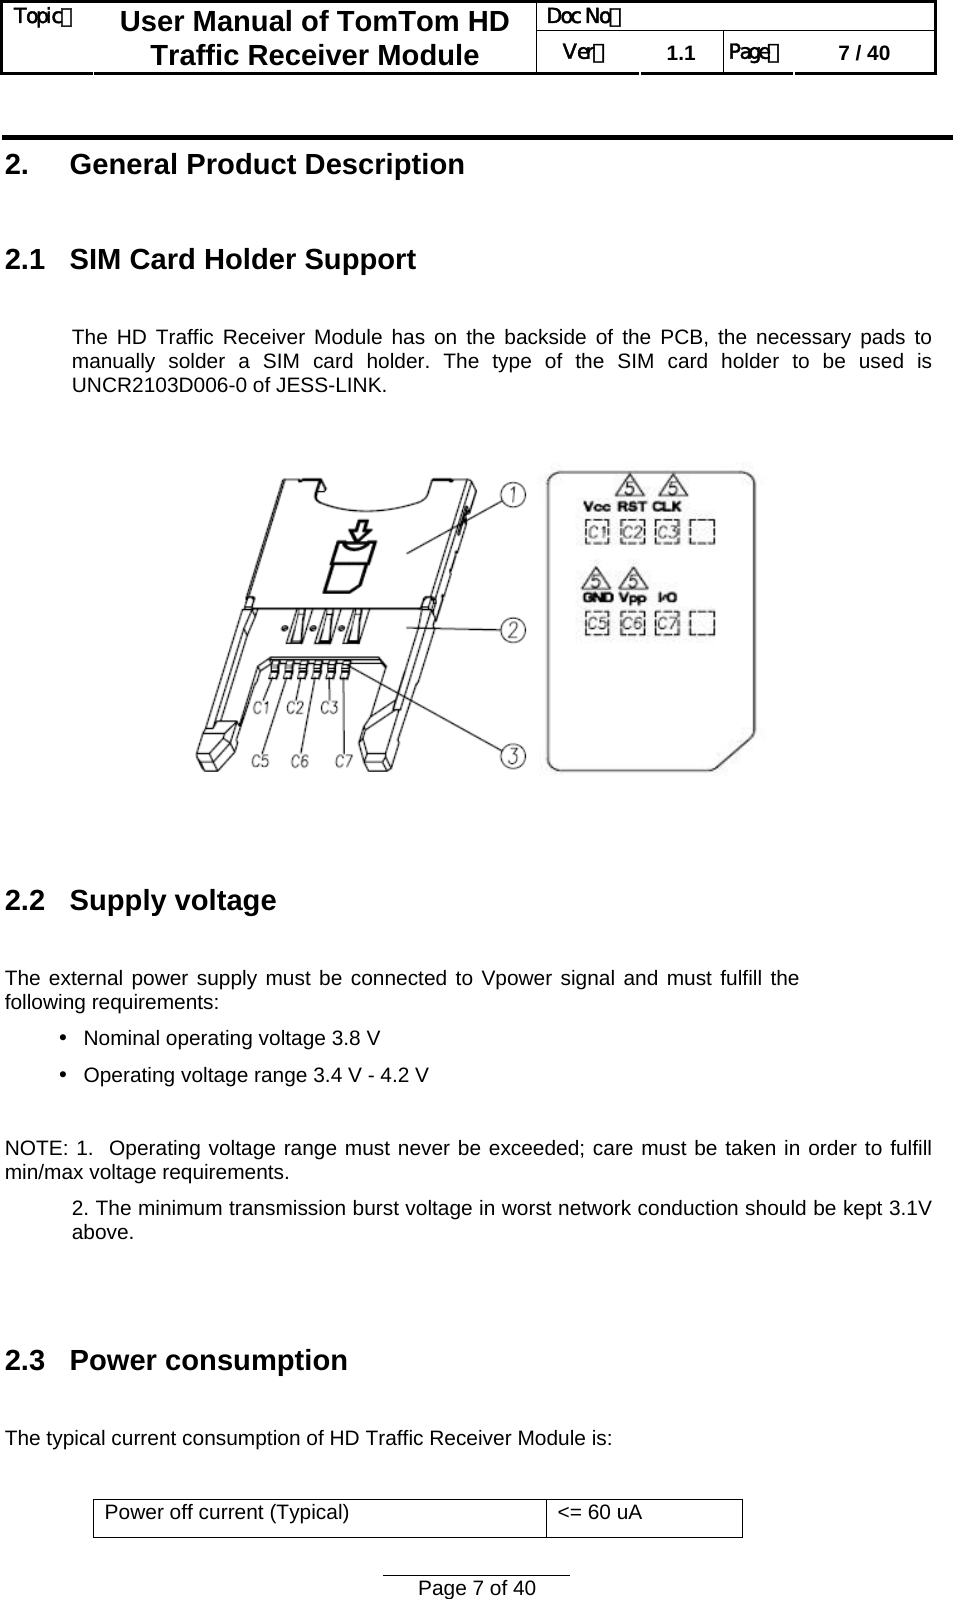 Doc No：  Topic：  User Manual of TomTom HD Traffic Receiver Module  Ver：  1.1  Page：  7 / 40  Page 7 of 40   2.     General Product Description  2.1   SIM Card Holder Support  The HD Traffic Receiver Module has on the backside of the PCB, the necessary pads to manually solder a SIM card holder. The type of the SIM card holder to be used is UNCR2103D006-0 of JESS-LINK.      2.2   Supply voltage  The external power supply must be connected to Vpower signal and must fulfill the following requirements:  Nominal operating voltage 3.8 V•  Operating voltage range 3.•4 V - 4.2 V  NOTE: 1.  Operating voltage range must never be exceeded; care must be taken in order to fulfill min/max voltage requirements. 2. The minimum transmission burst voltage in worst network conduction should be kept 3.1V above.   2.3   Power consumption  The typical current consumption of HD Traffic Receiver Module is:  Power off current (Typical)  &lt;= 60 uA 